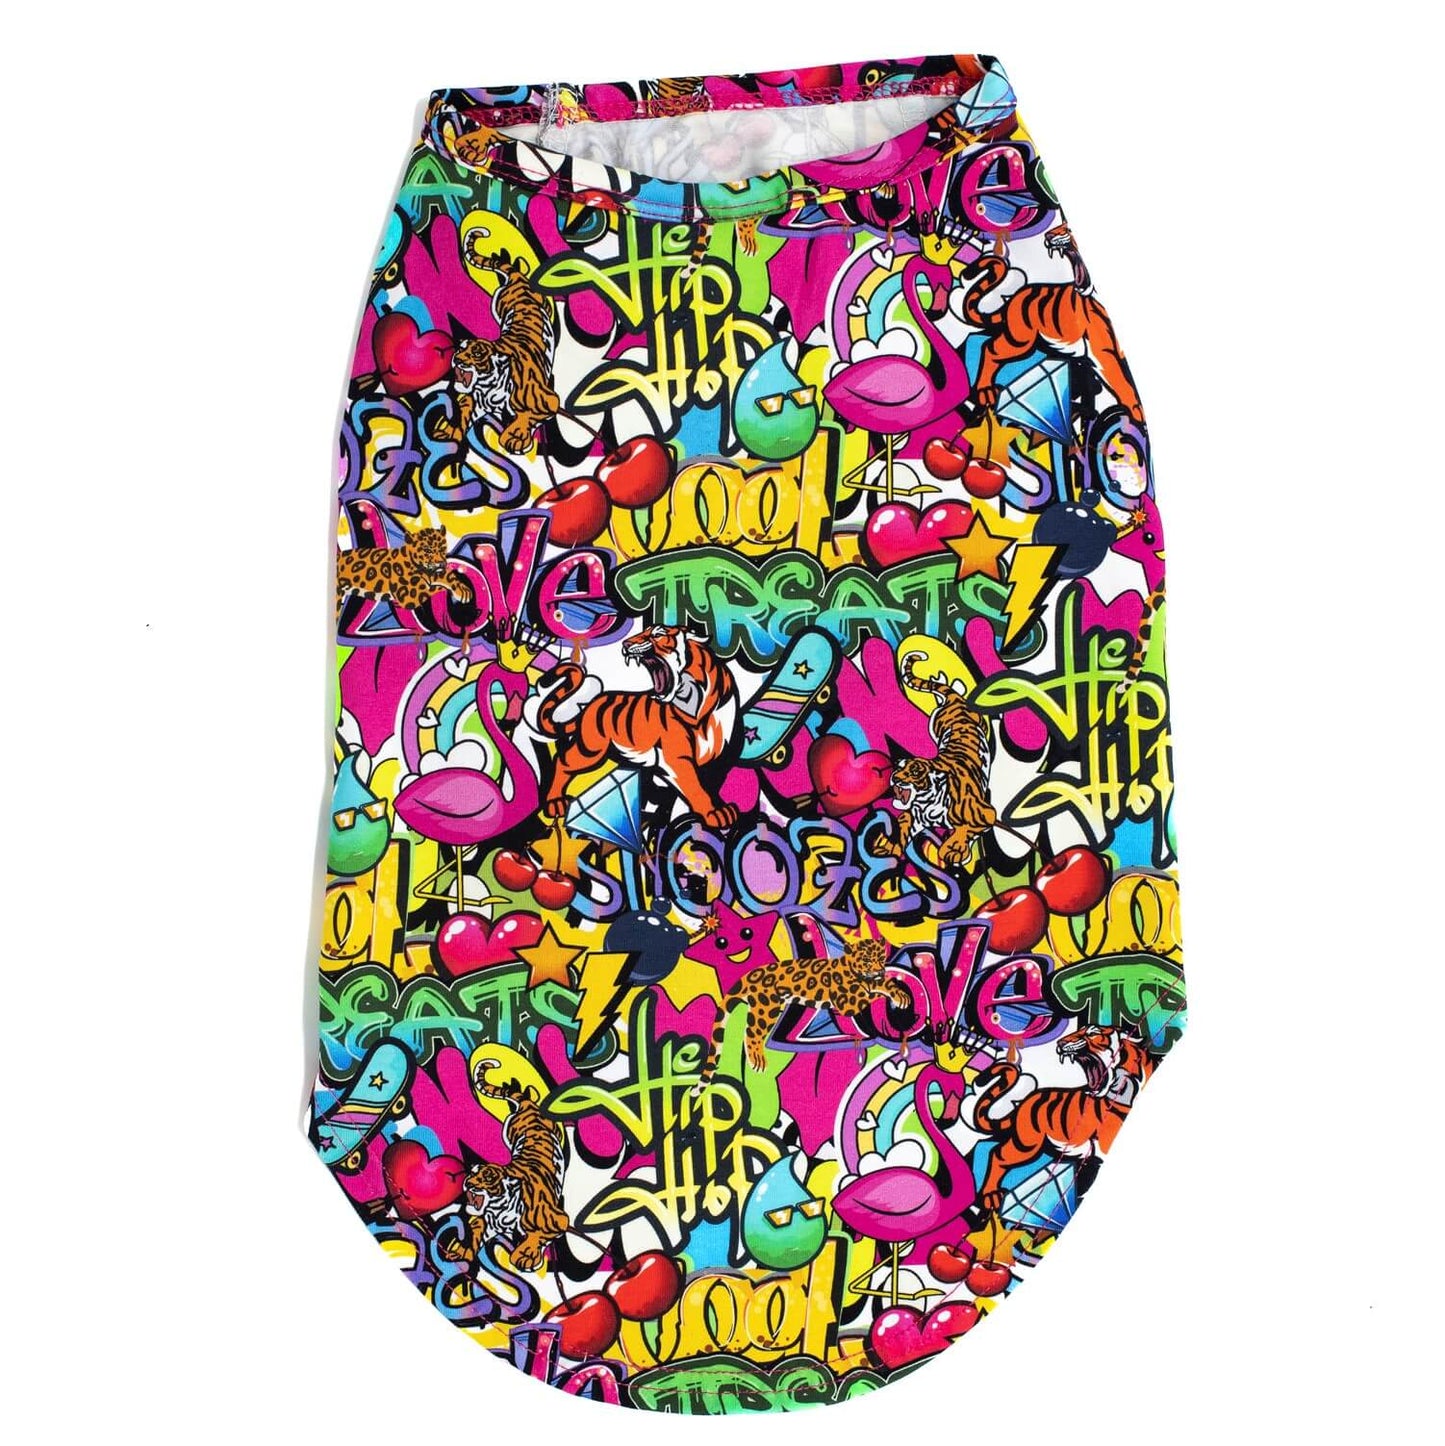  A back flat-lay of Vibrant Hound's Writting on the wall shirt for dogs. It is covered in a bright coloured graffiti print featuring Skate boards, lions, tigets and flamingos.